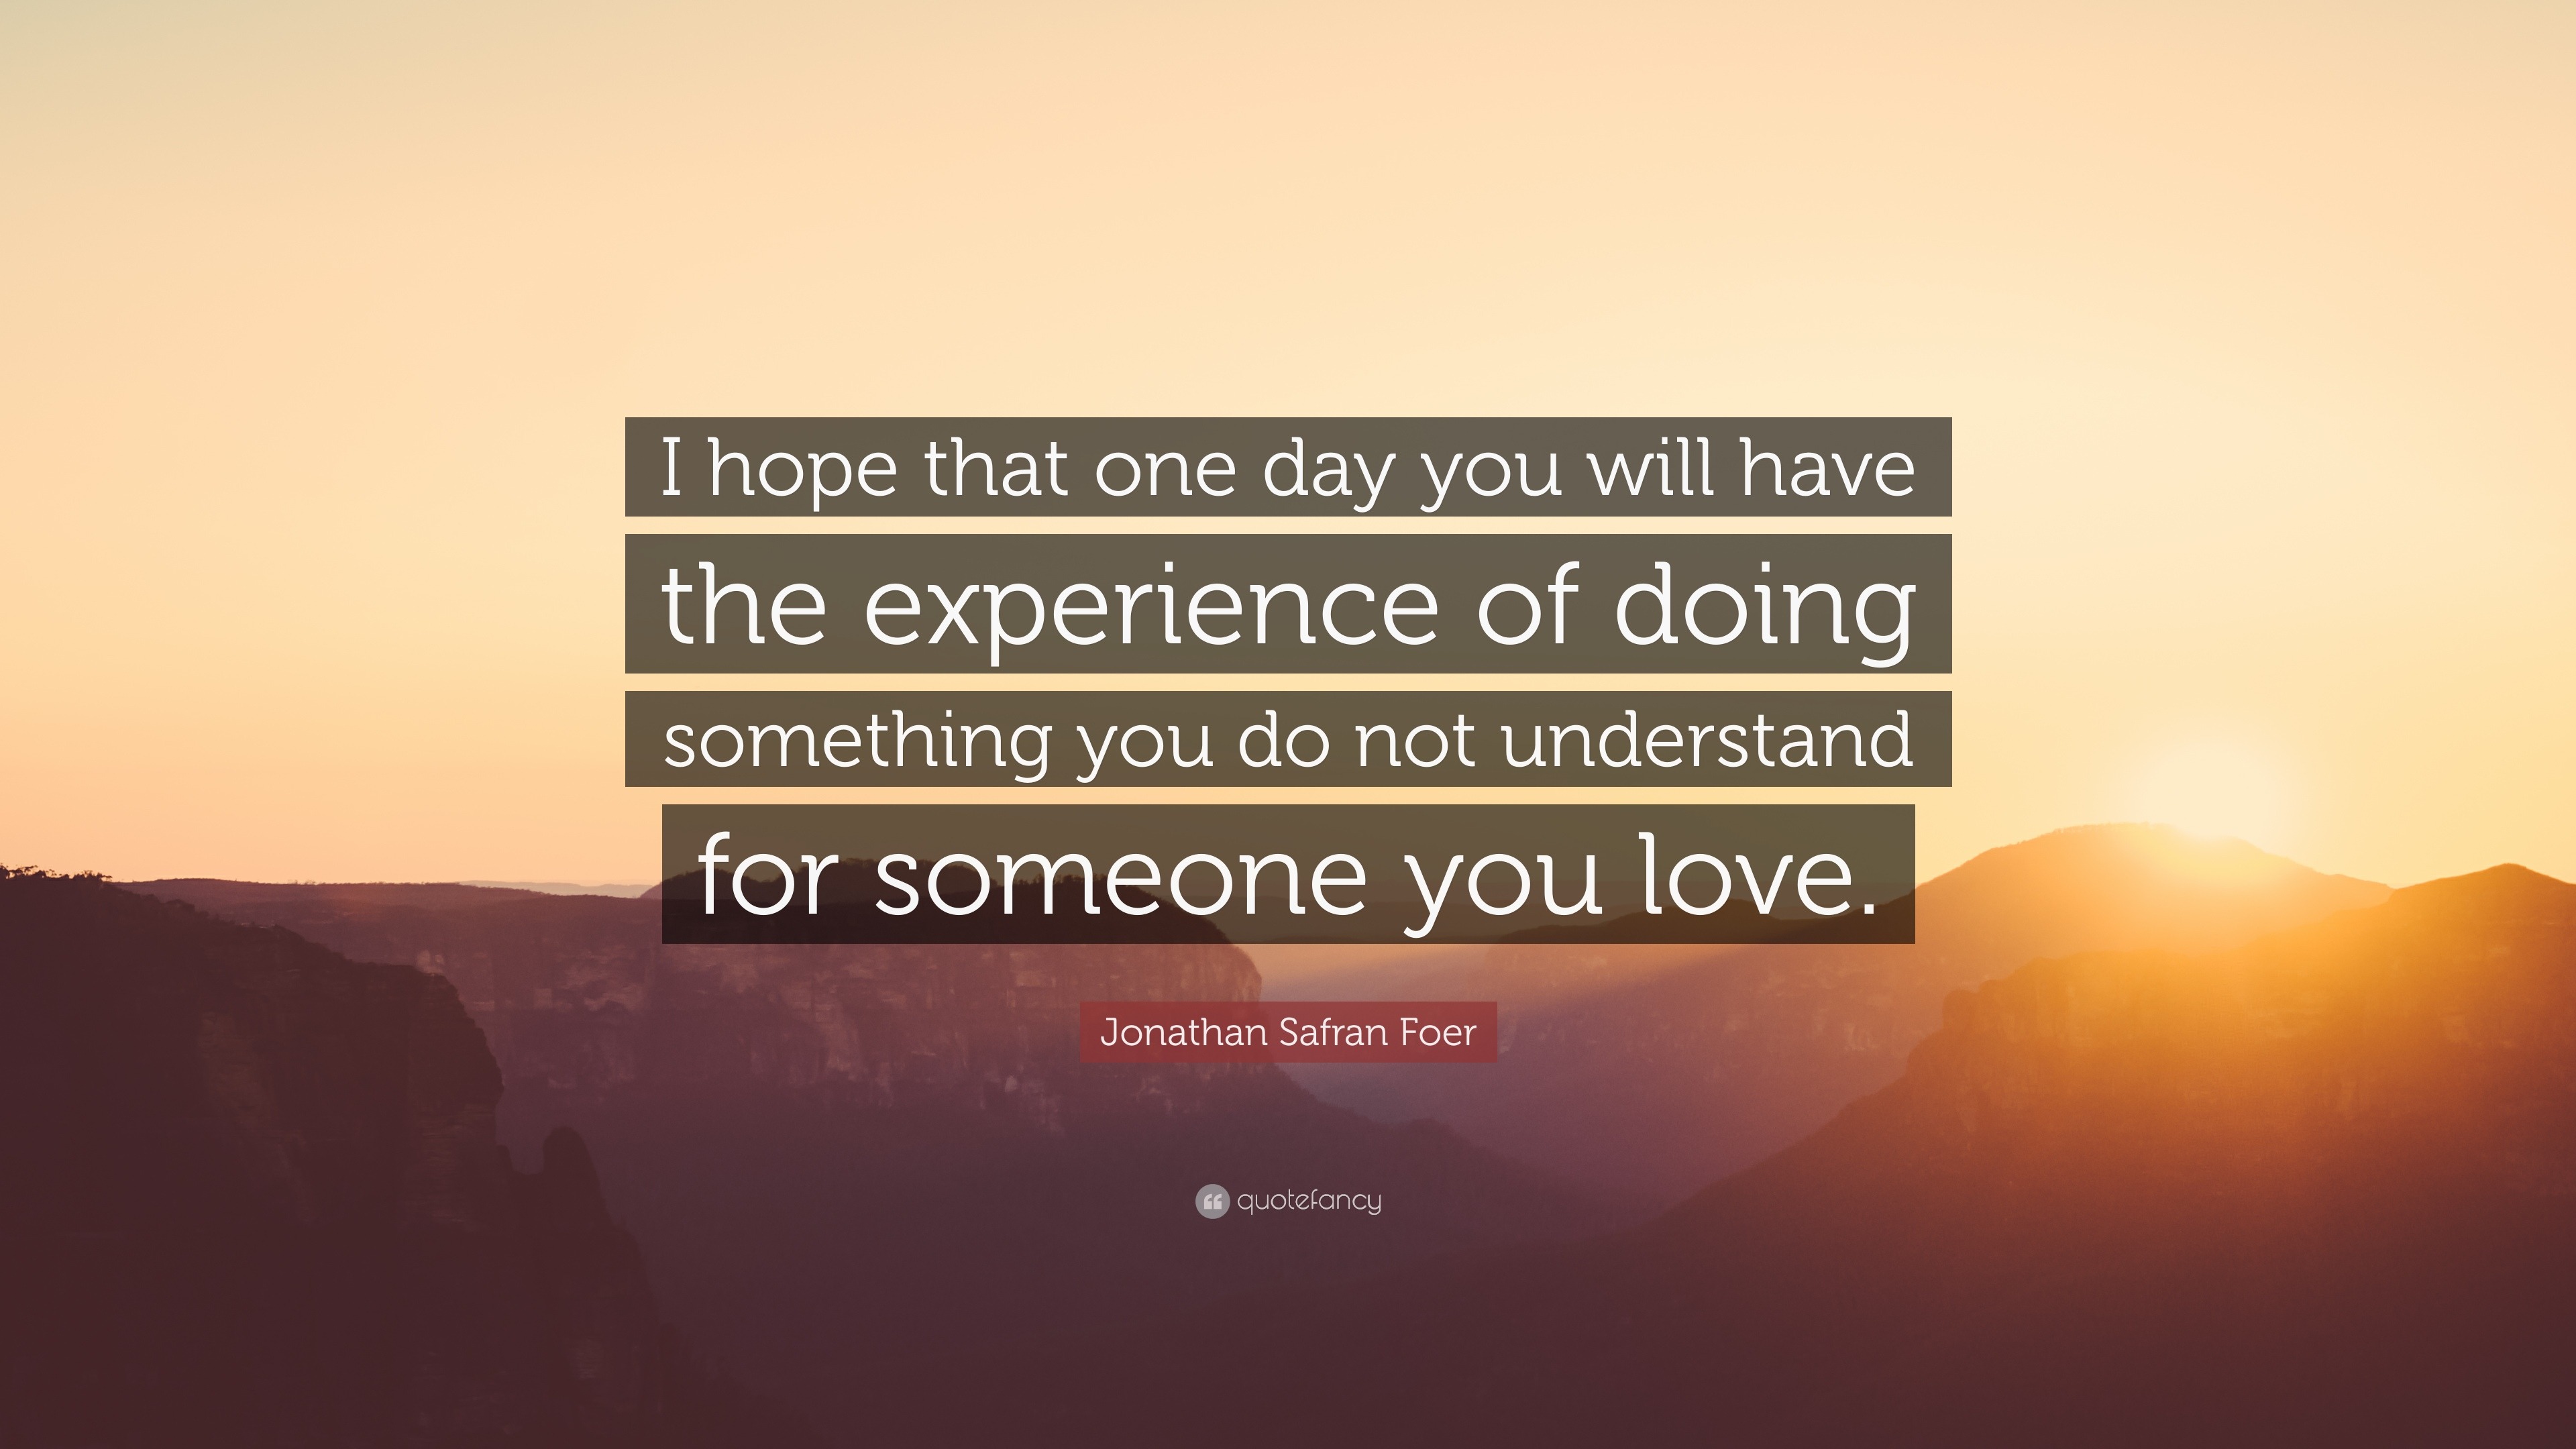 Jonathan Safran Foer Quote “I hope that one day you will have the experience